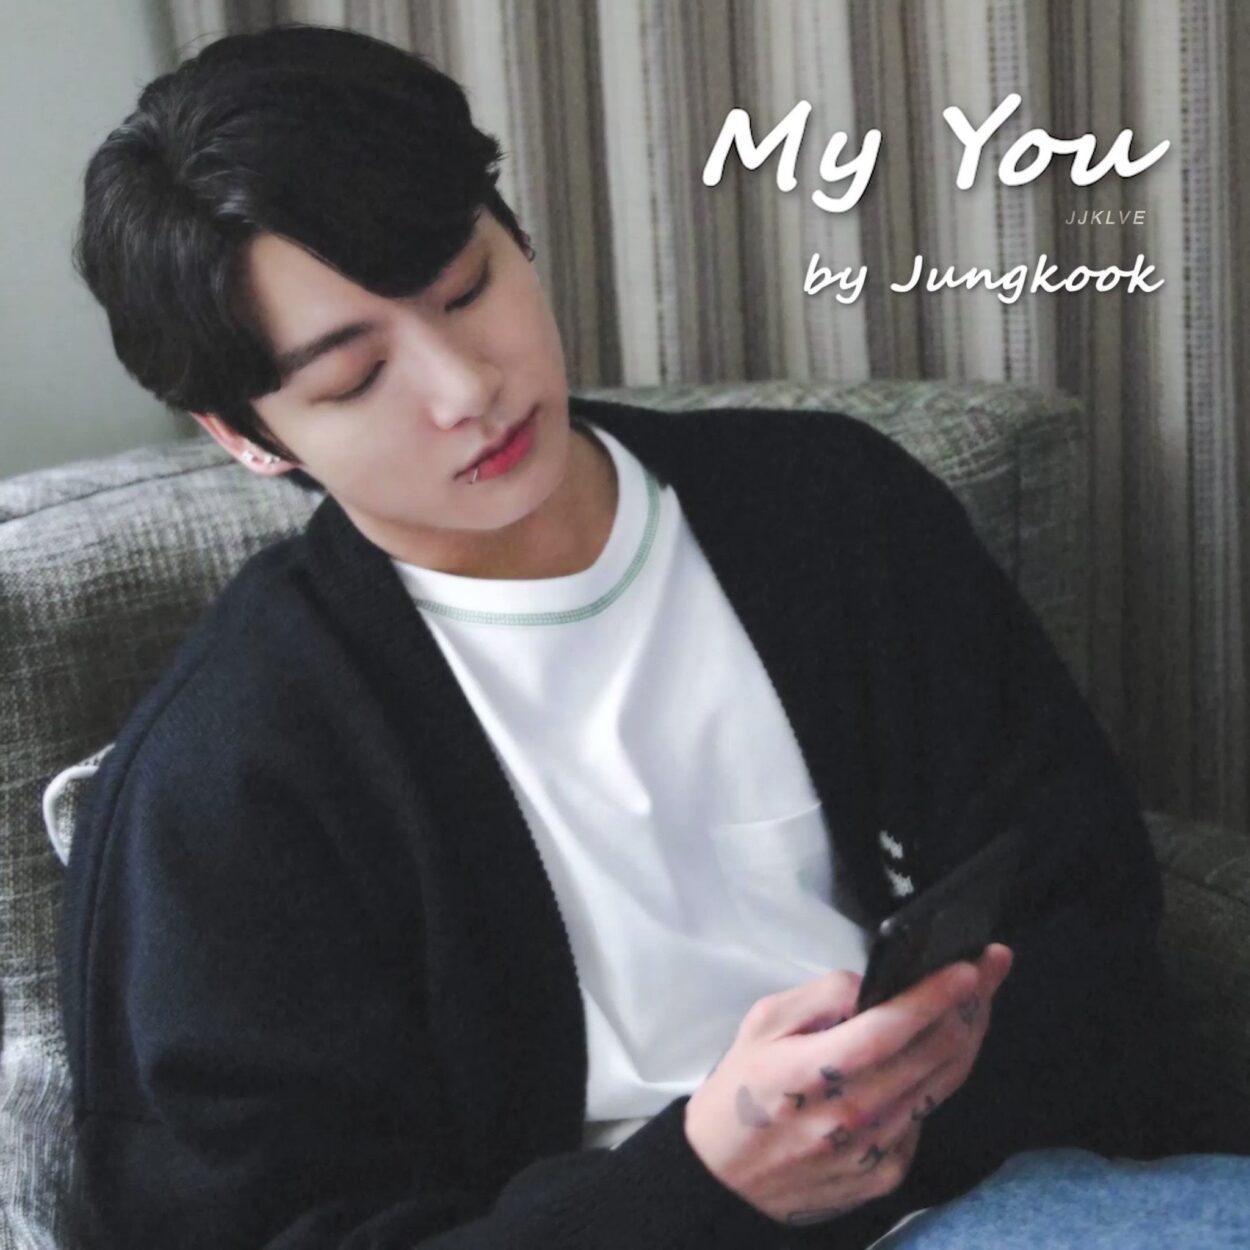 Jungkook’s “My You” has now surpassed 100M streams on Spotify! - 020724